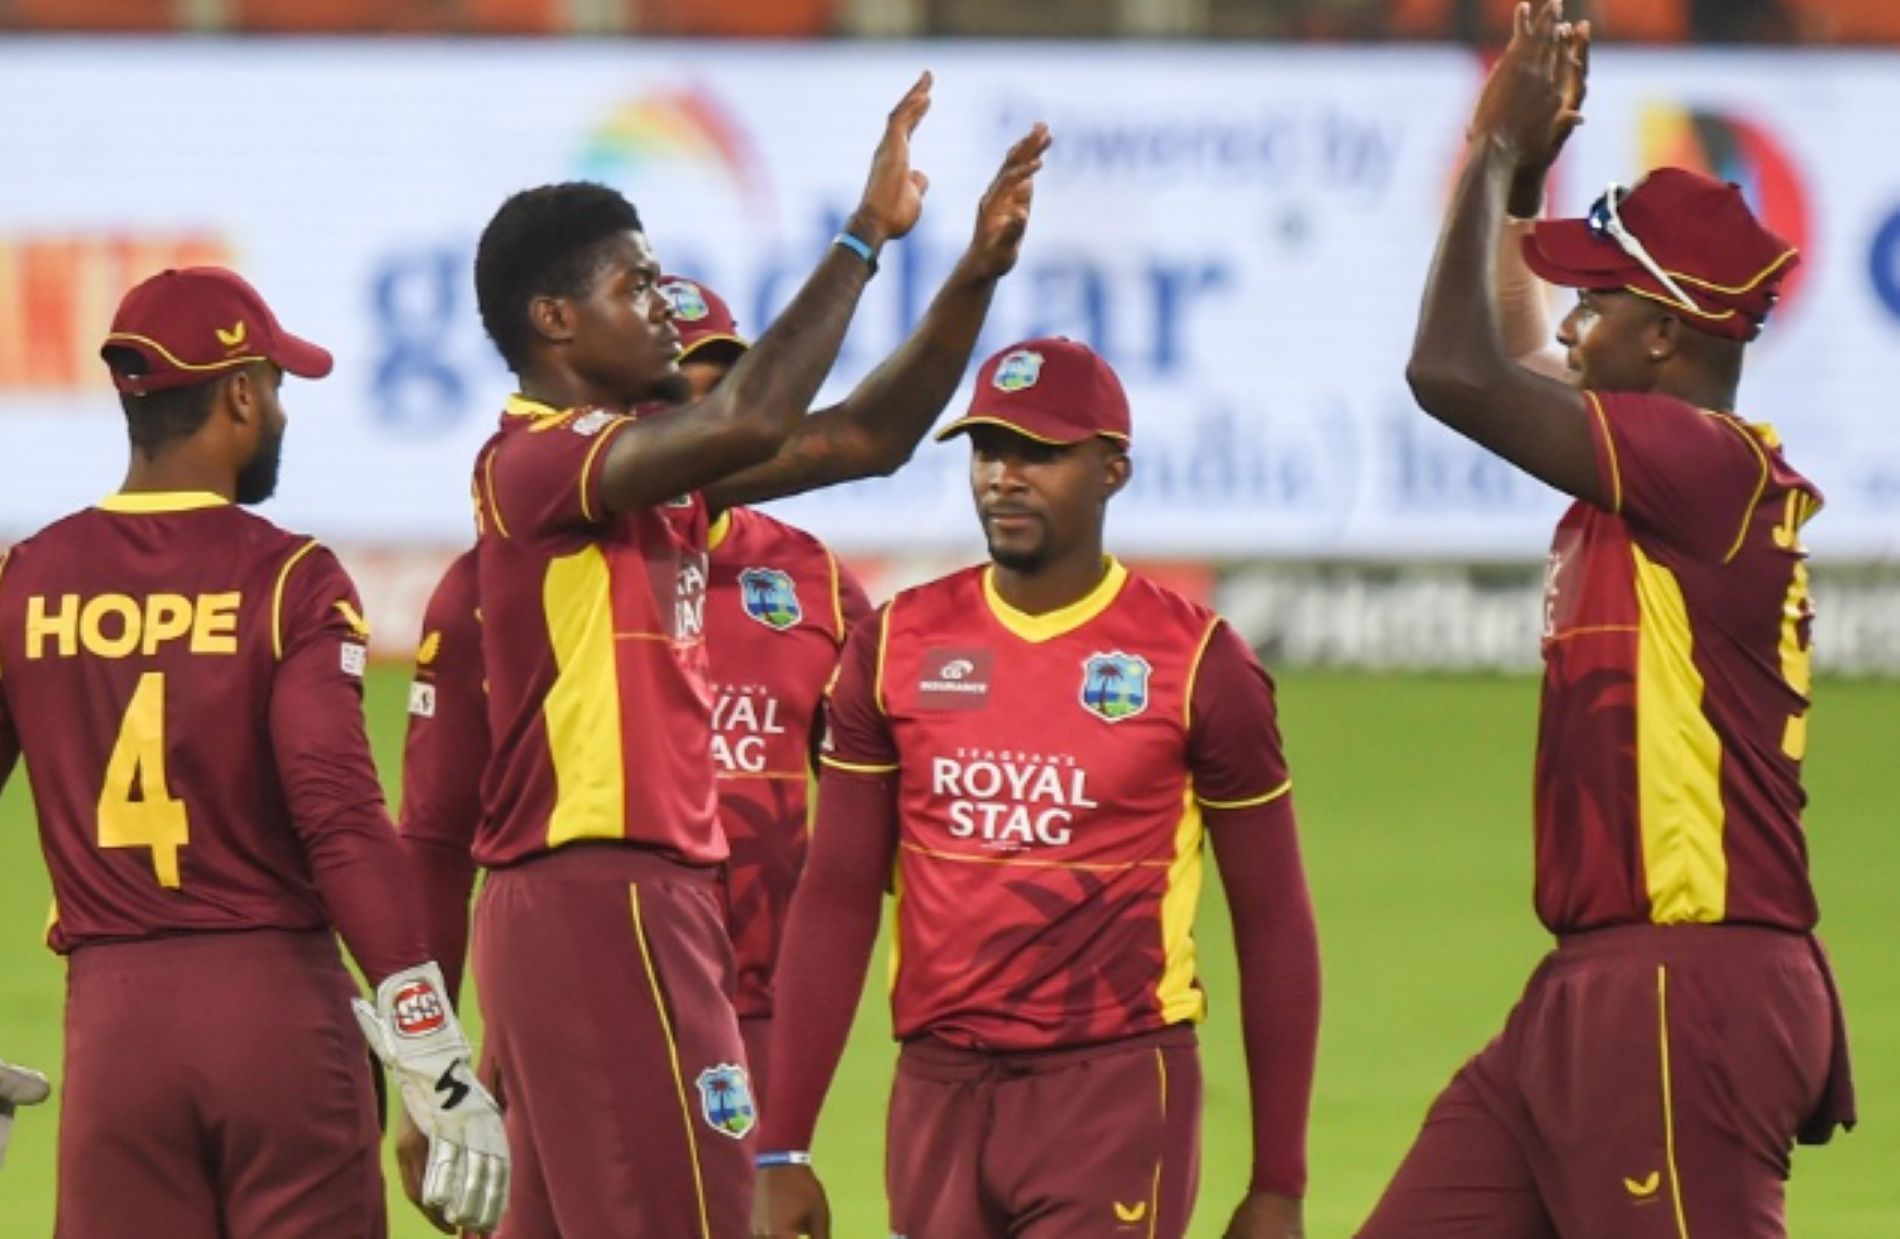 West Indies will look to revive their ODI fortunes